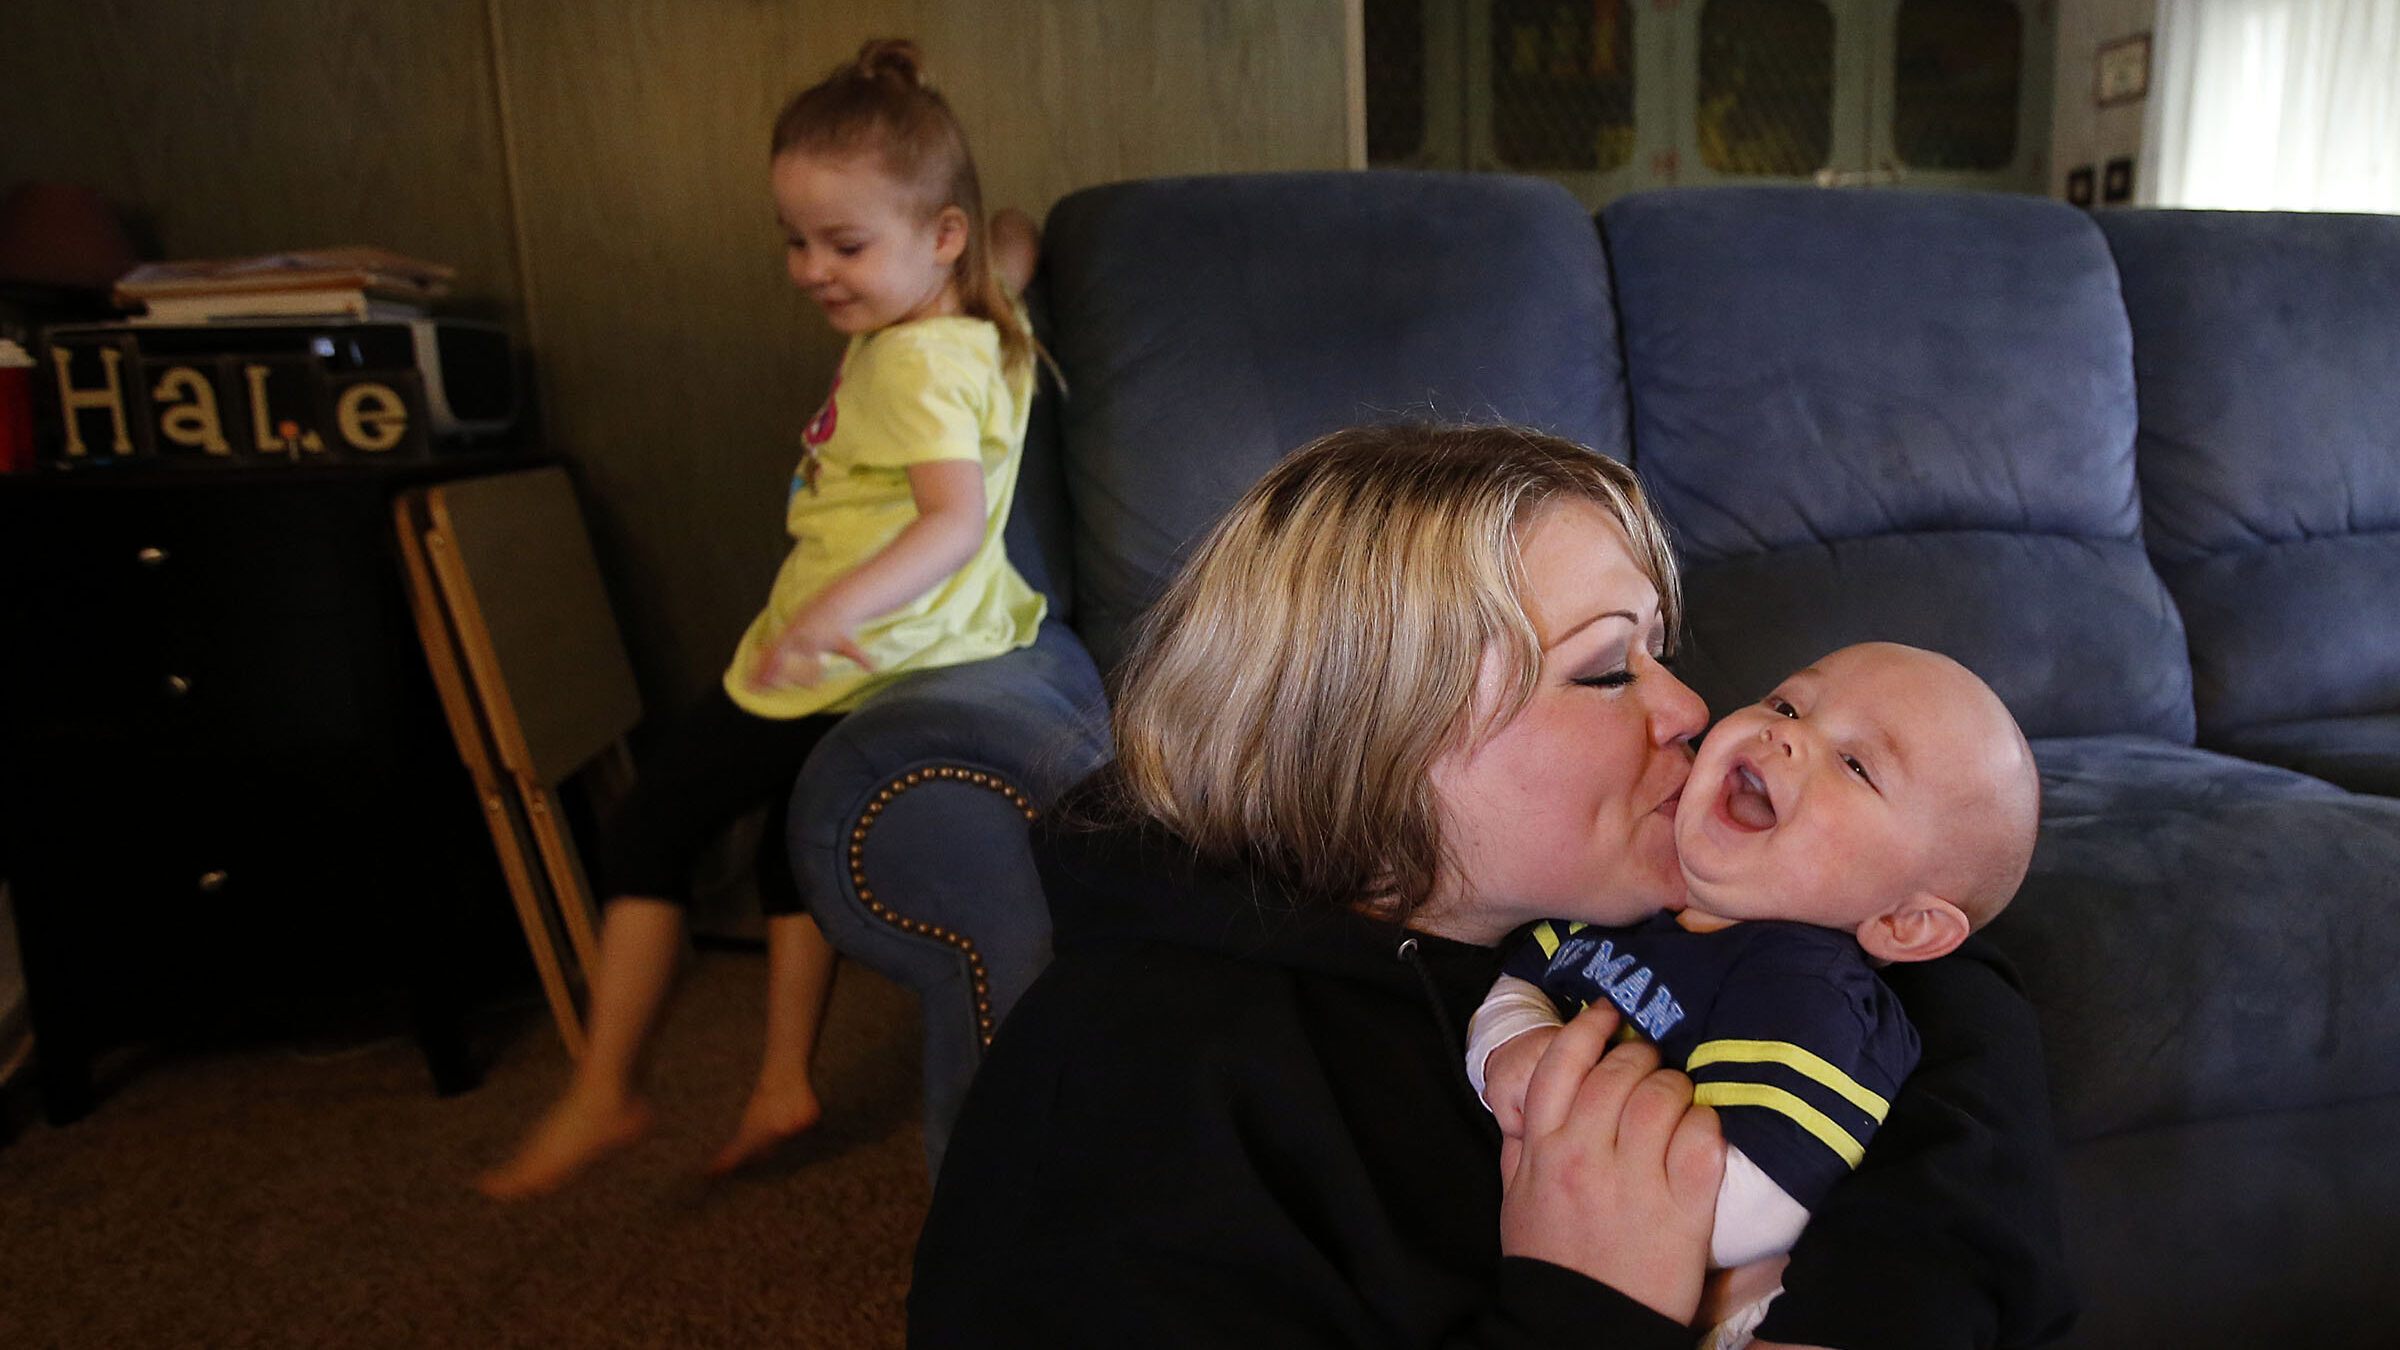 FILE: Stacie Hale plays with her son Theodor at home in Smithfield. Stacie hoped to get aid from WI...